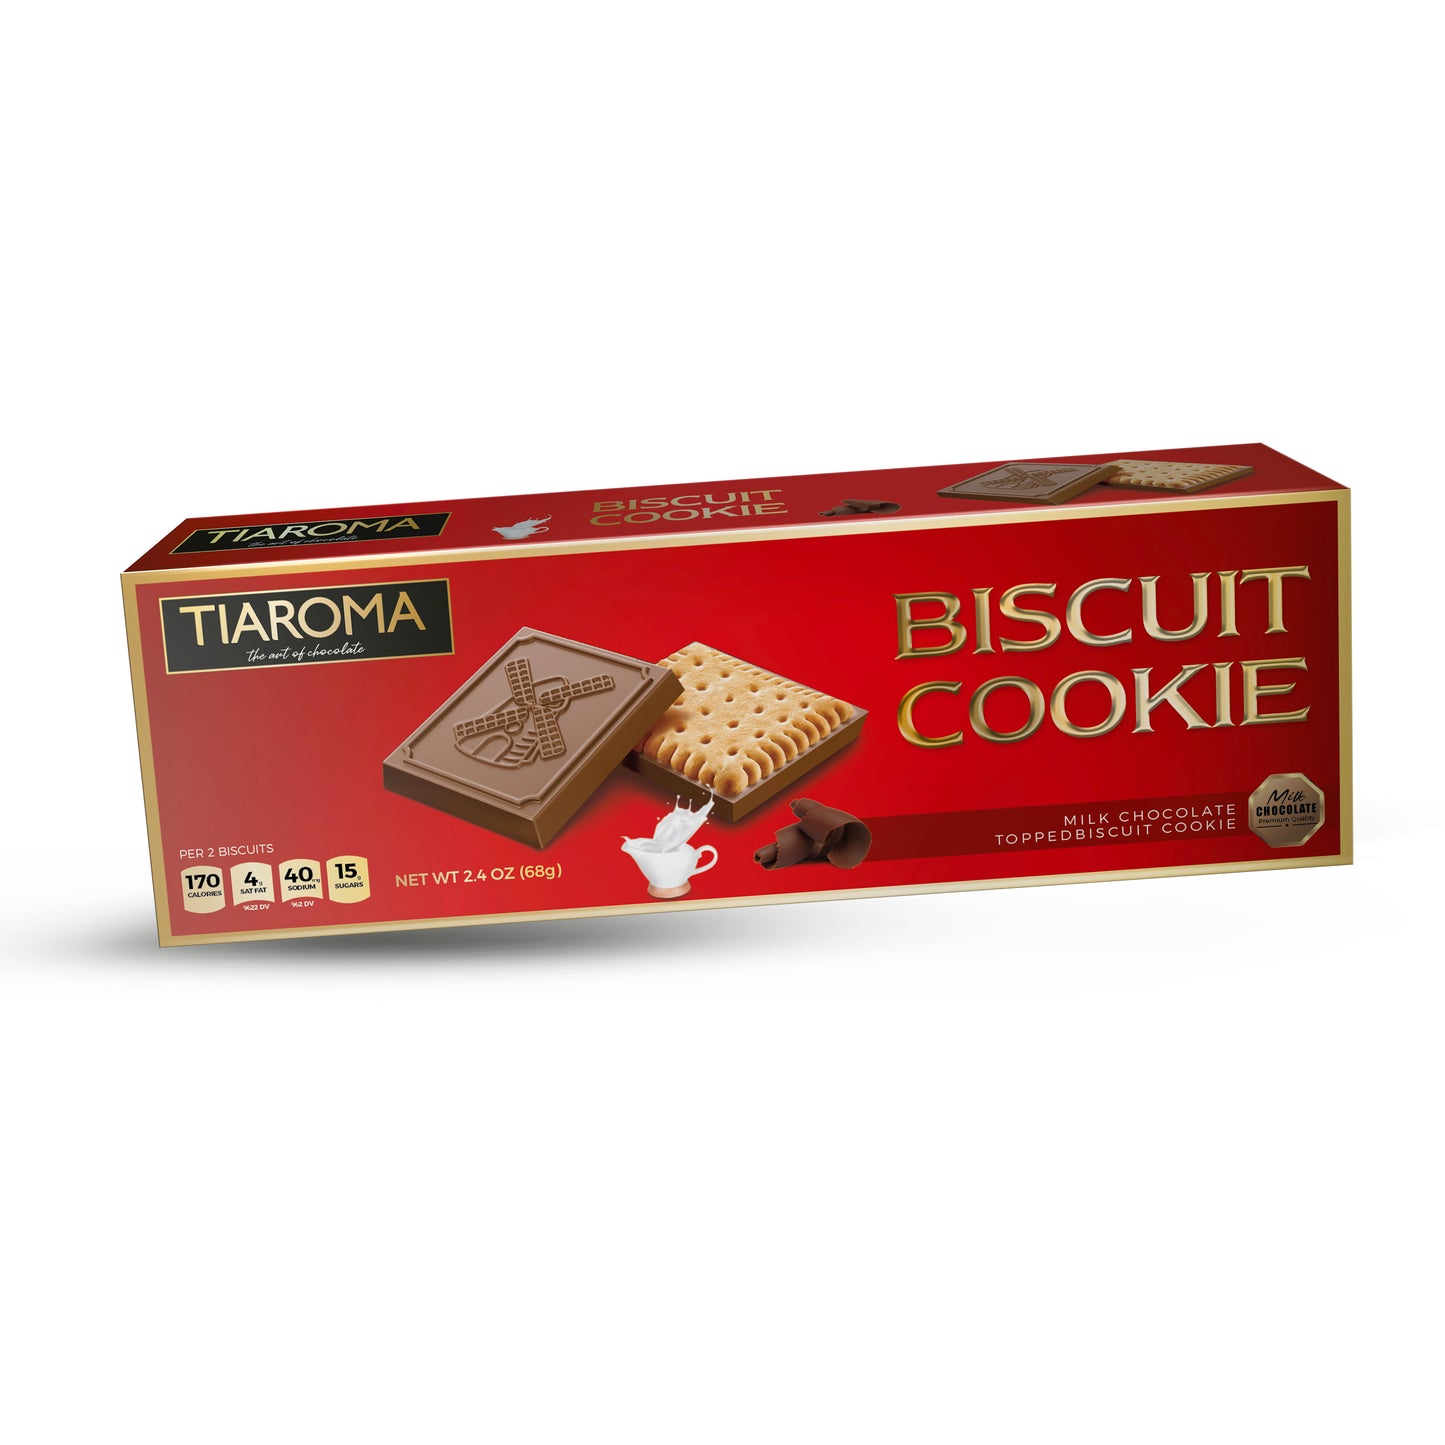 Milk Chocolate Topped Biscuit Cookie - Premium Quality European Petit Biscuit (Individually Boxed, %55 Cocoa Mass, Pack of 6)